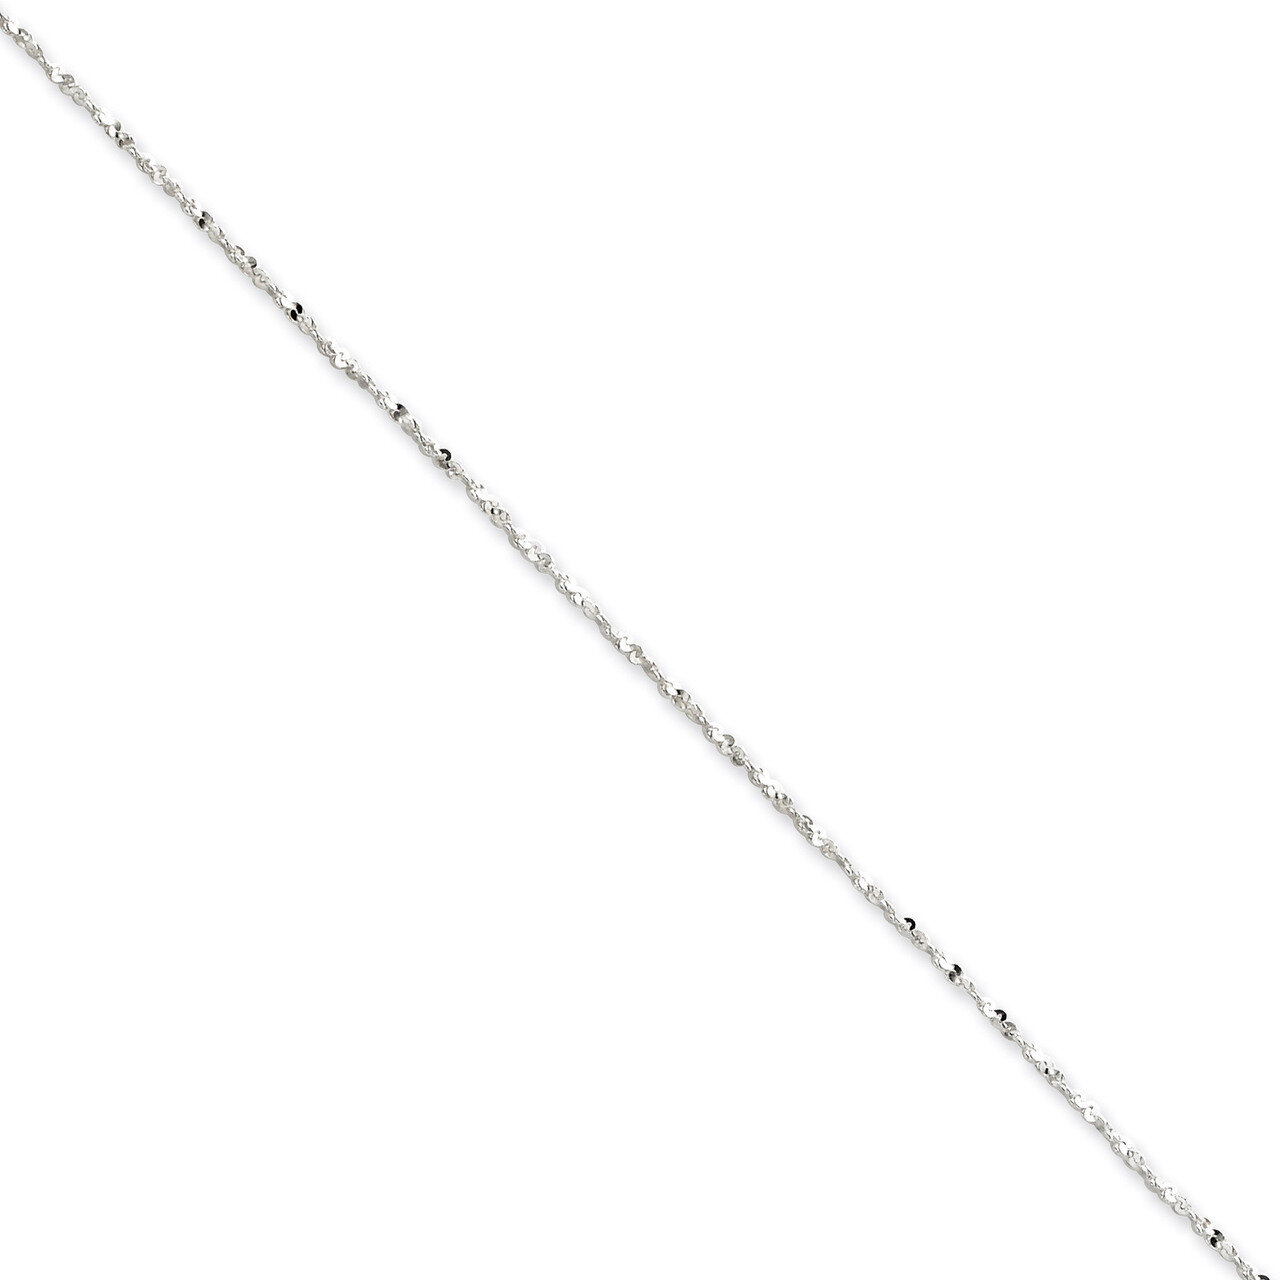 24 Inch 1.2mm Twisted Serpentine Chain Sterling Silver QPEN6-24